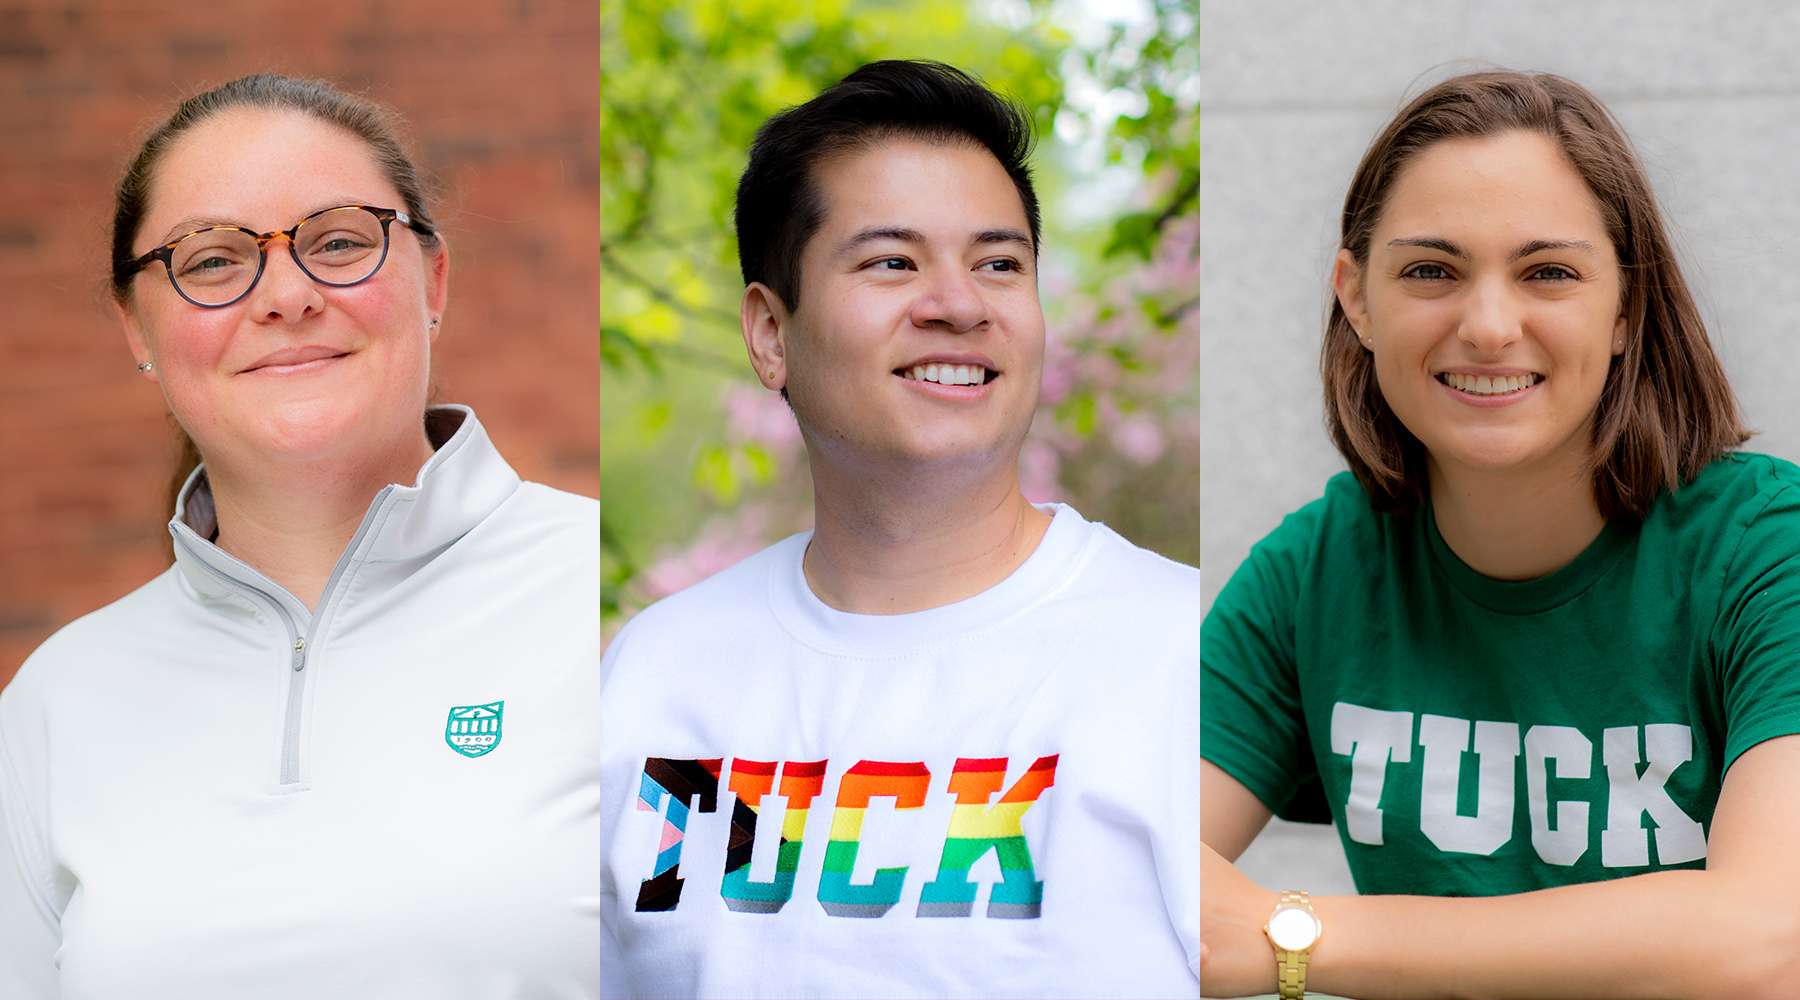 blog-many-voices-one-tuck-meet-tuck-pride-co-chairs-nicole-kutteh-t24-luke-southwell-chan-t24-allie-coukos-t24-header.jpg